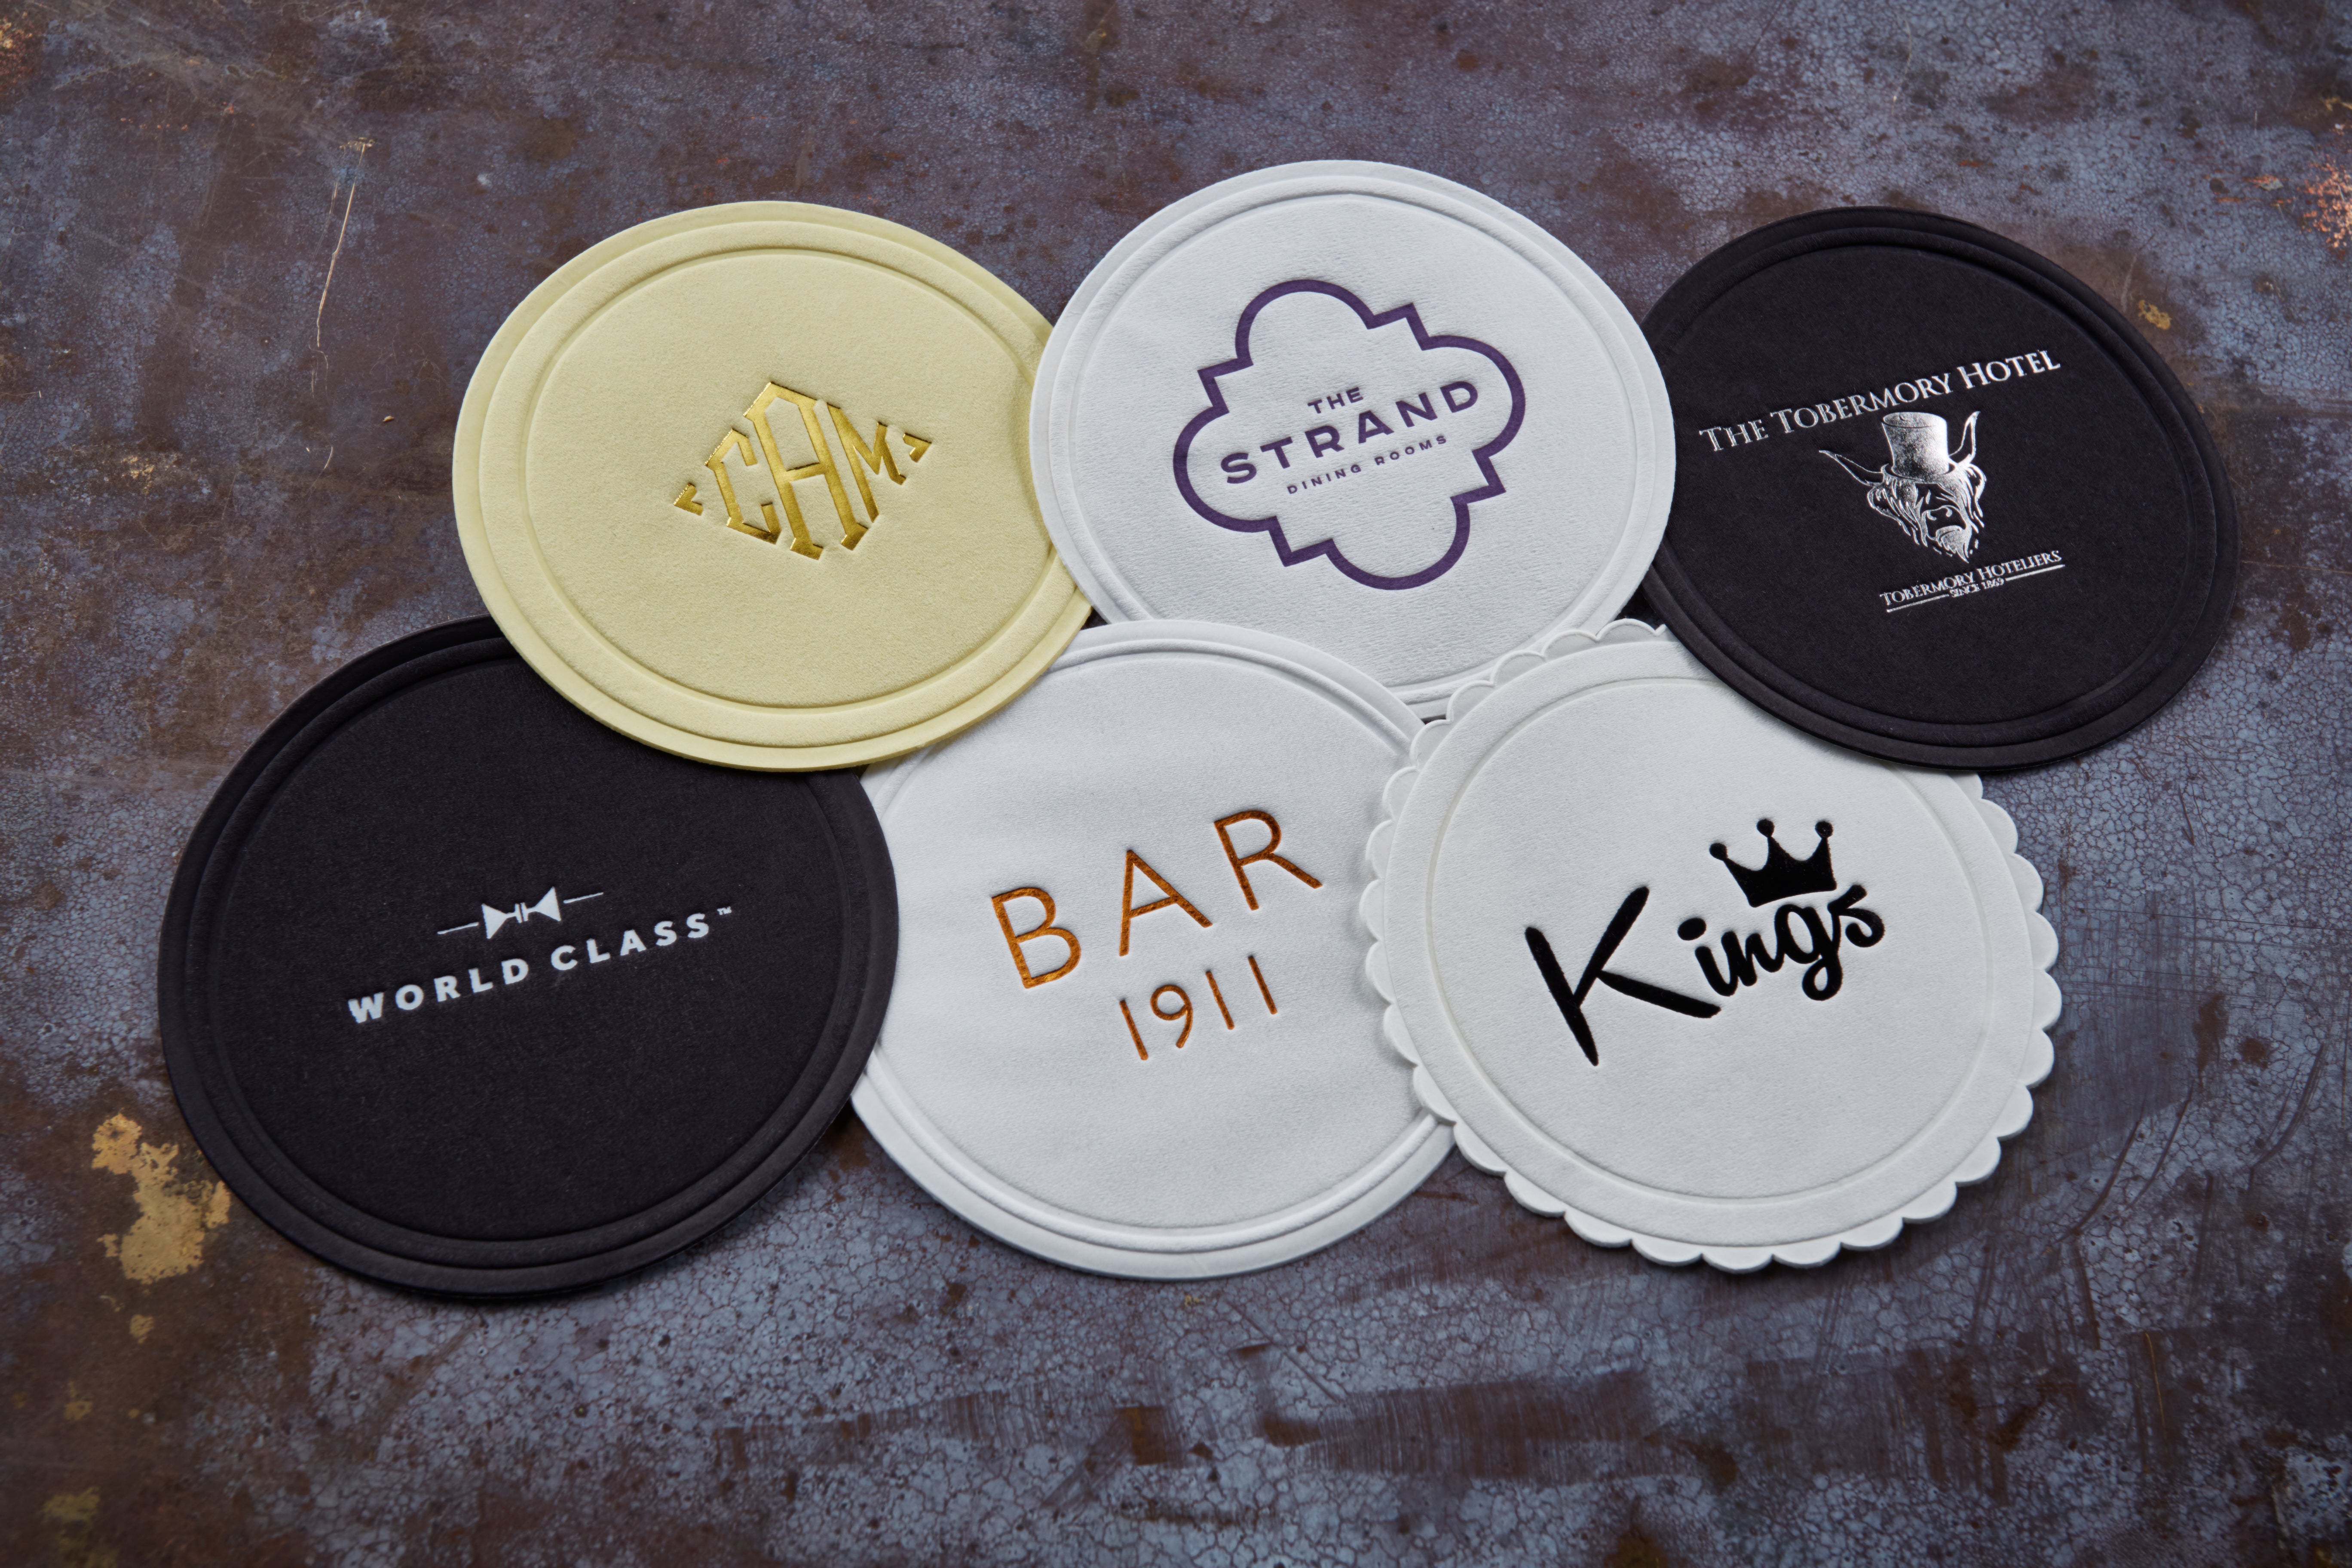 Custom Coasters, Paper Coasters for Drinks